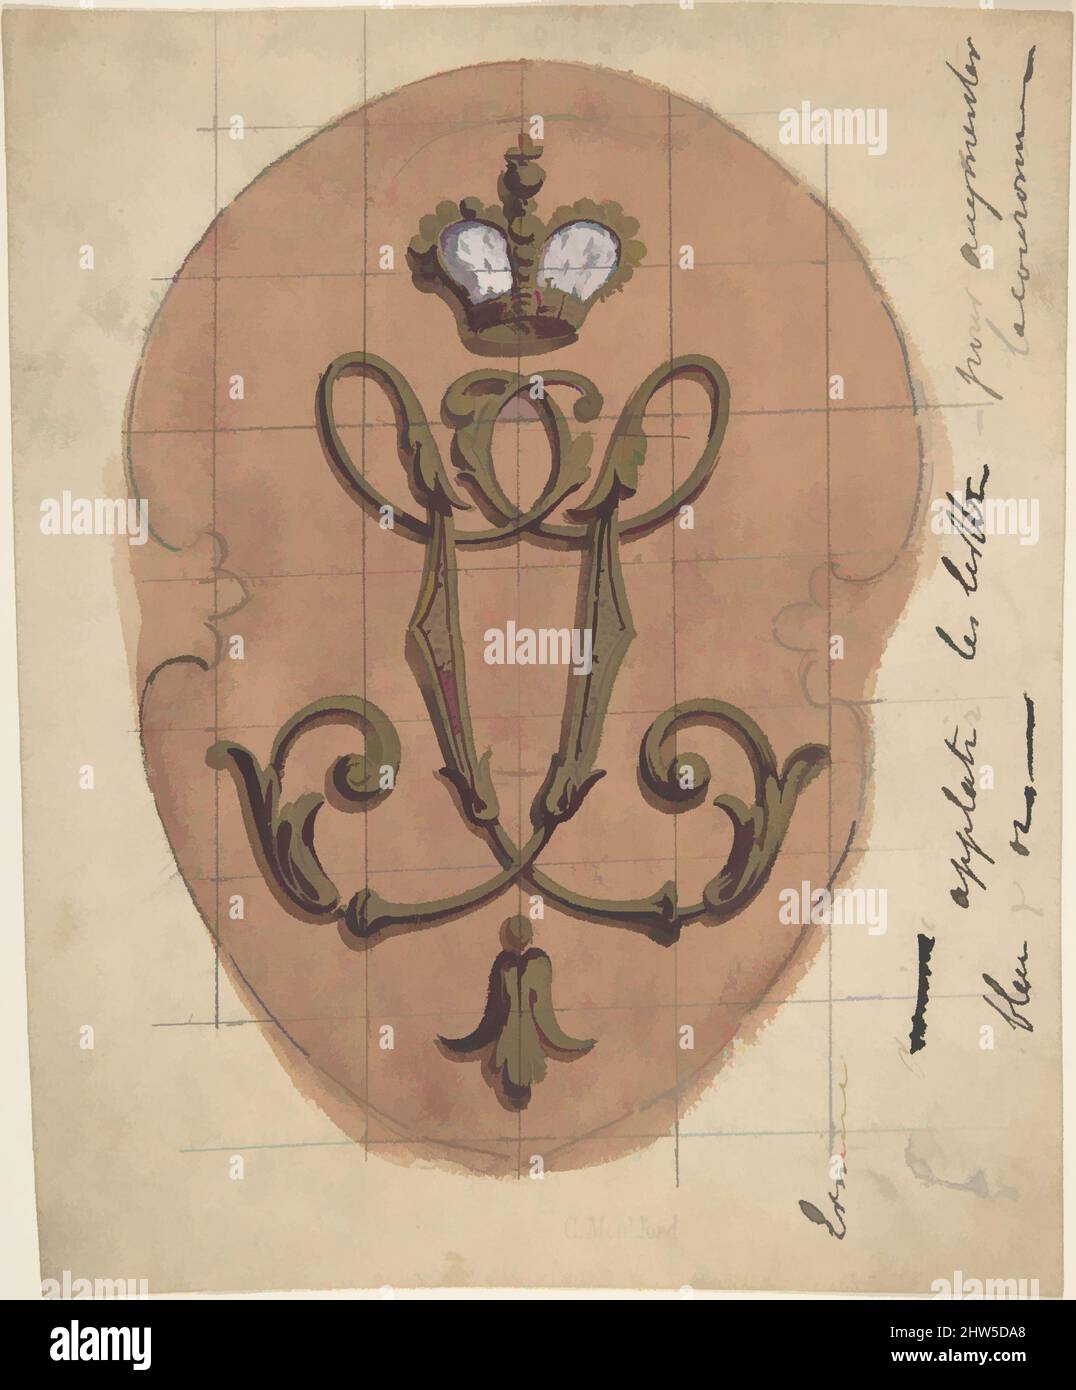 Art inspired by Design for a Monogram Surmounted by a Crown, 19th century, Pen and black ink, 8 1/4 x 6 3/4 in. (21.0 x 17.1 cm), Drawings, Charles Monblond (French, 19th century, Classic works modernized by Artotop with a splash of modernity. Shapes, color and value, eye-catching visual impact on art. Emotions through freedom of artworks in a contemporary way. A timeless message pursuing a wildly creative new direction. Artists turning to the digital medium and creating the Artotop NFT Stock Photo